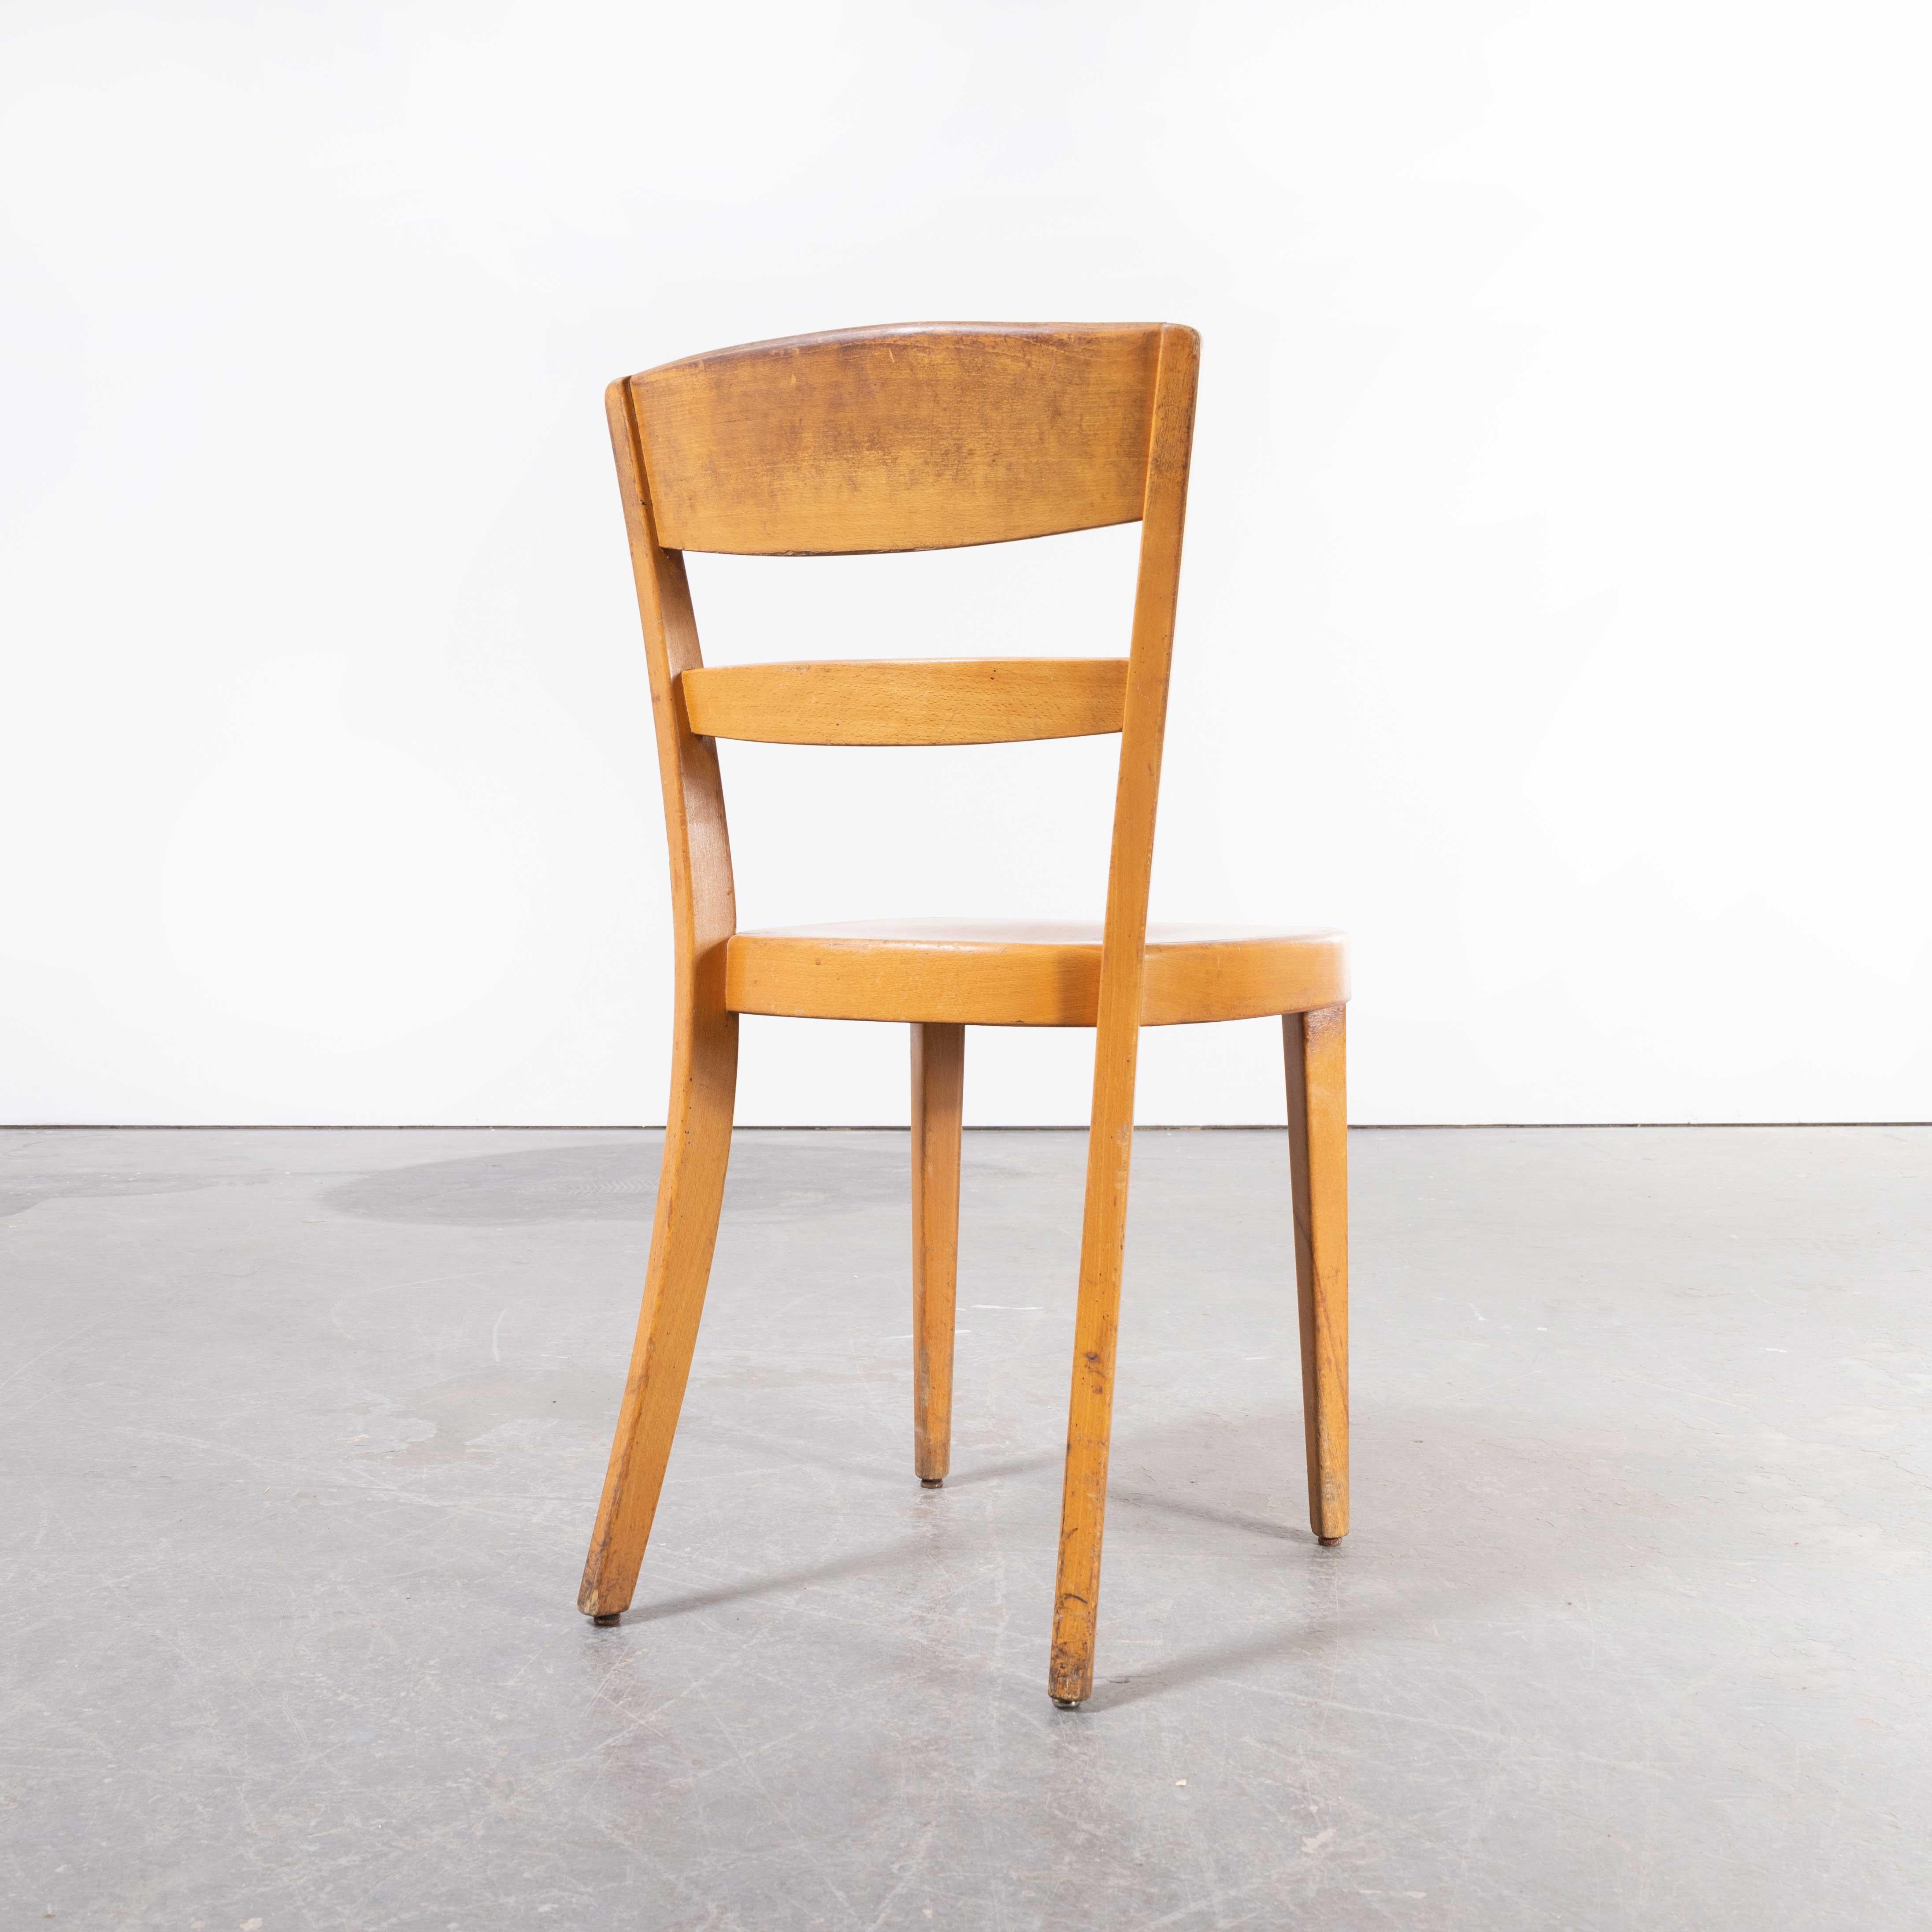 1960’s Horgen Glarus Beech Ladder Back Dining Chairs – Set Of Eight
1960’s Horgen Glarus Beech Ladder Back Dining Chairs – Set Of Eight. One of the best sets of chairs we have sourced and our first from Horgen Glarus the oldest surviving furniture